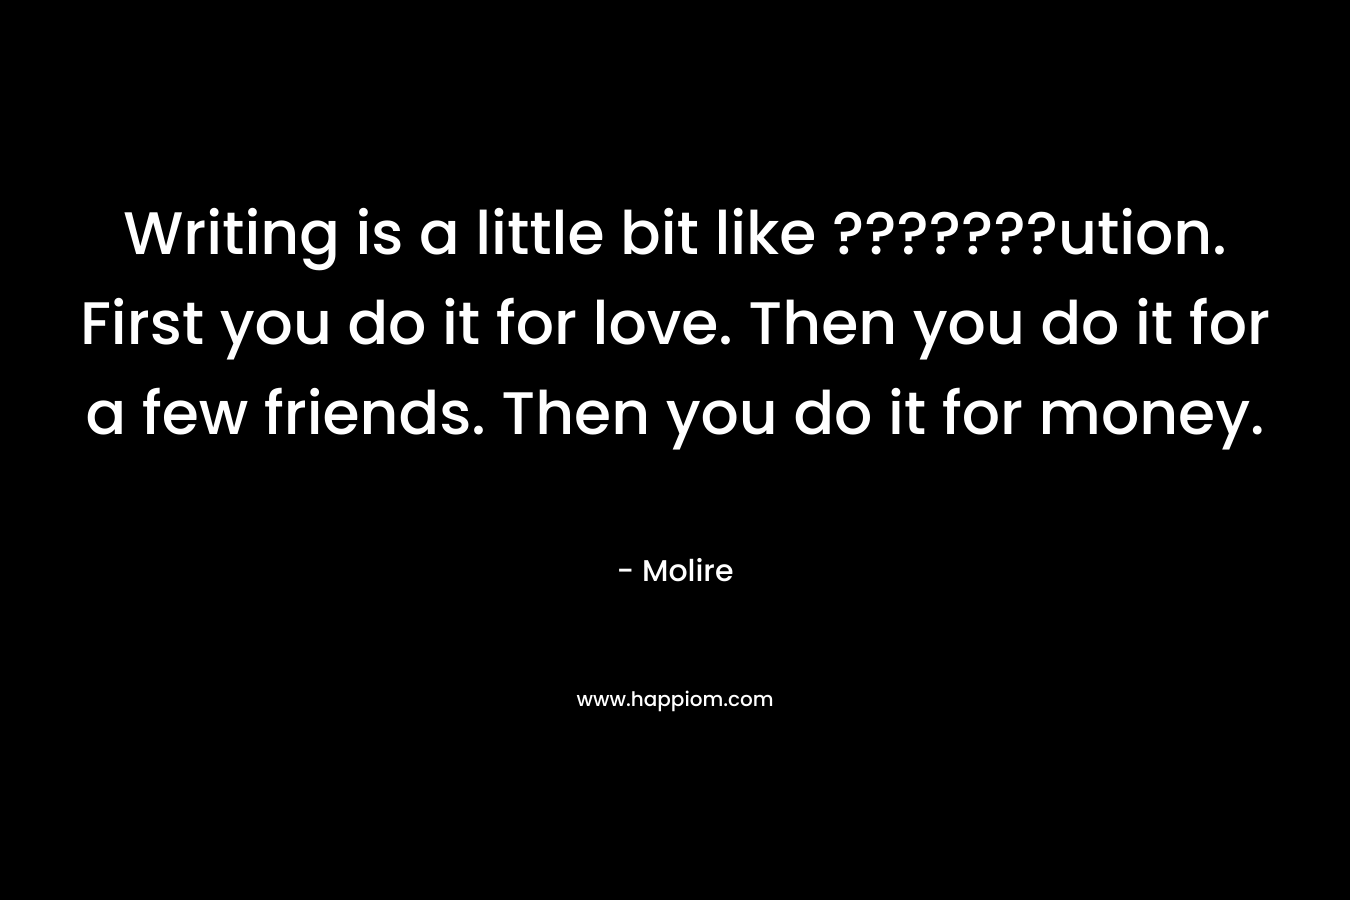 Writing is a little bit like ???????ution. First you do it for love. Then you do it for a few friends. Then you do it for money. – Molire